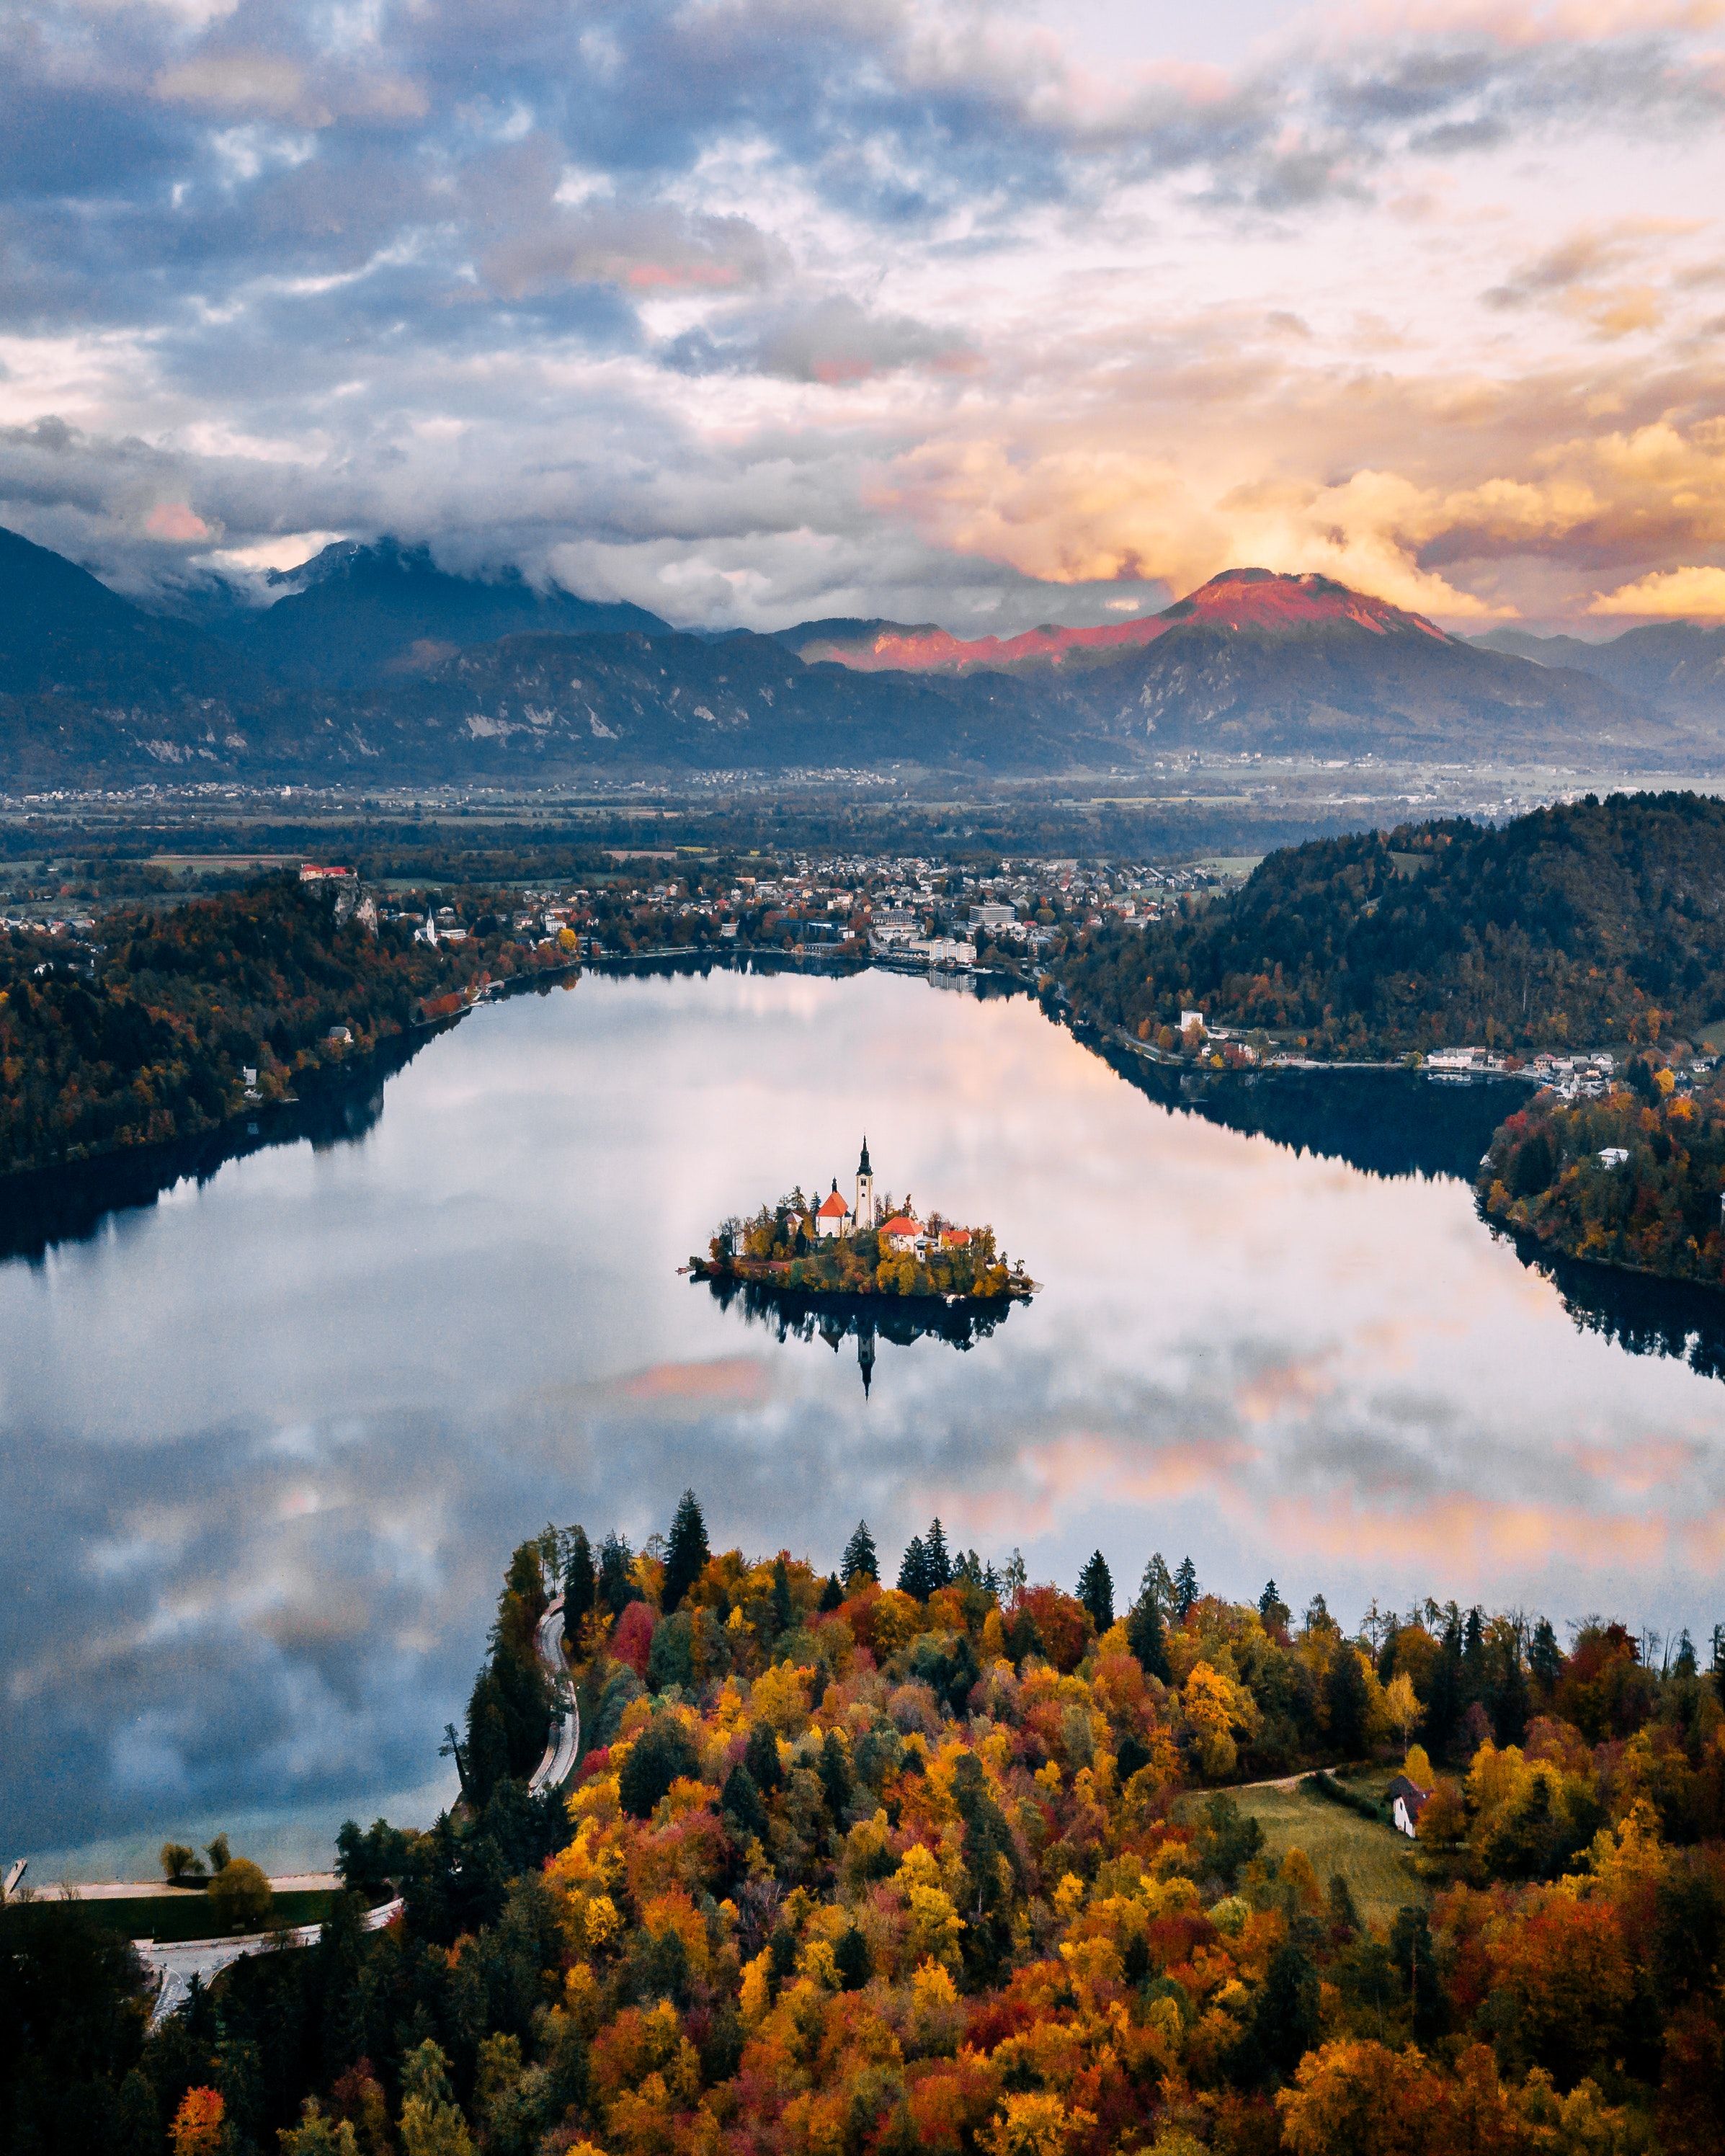 Lake Bled, Slovenia in the fall